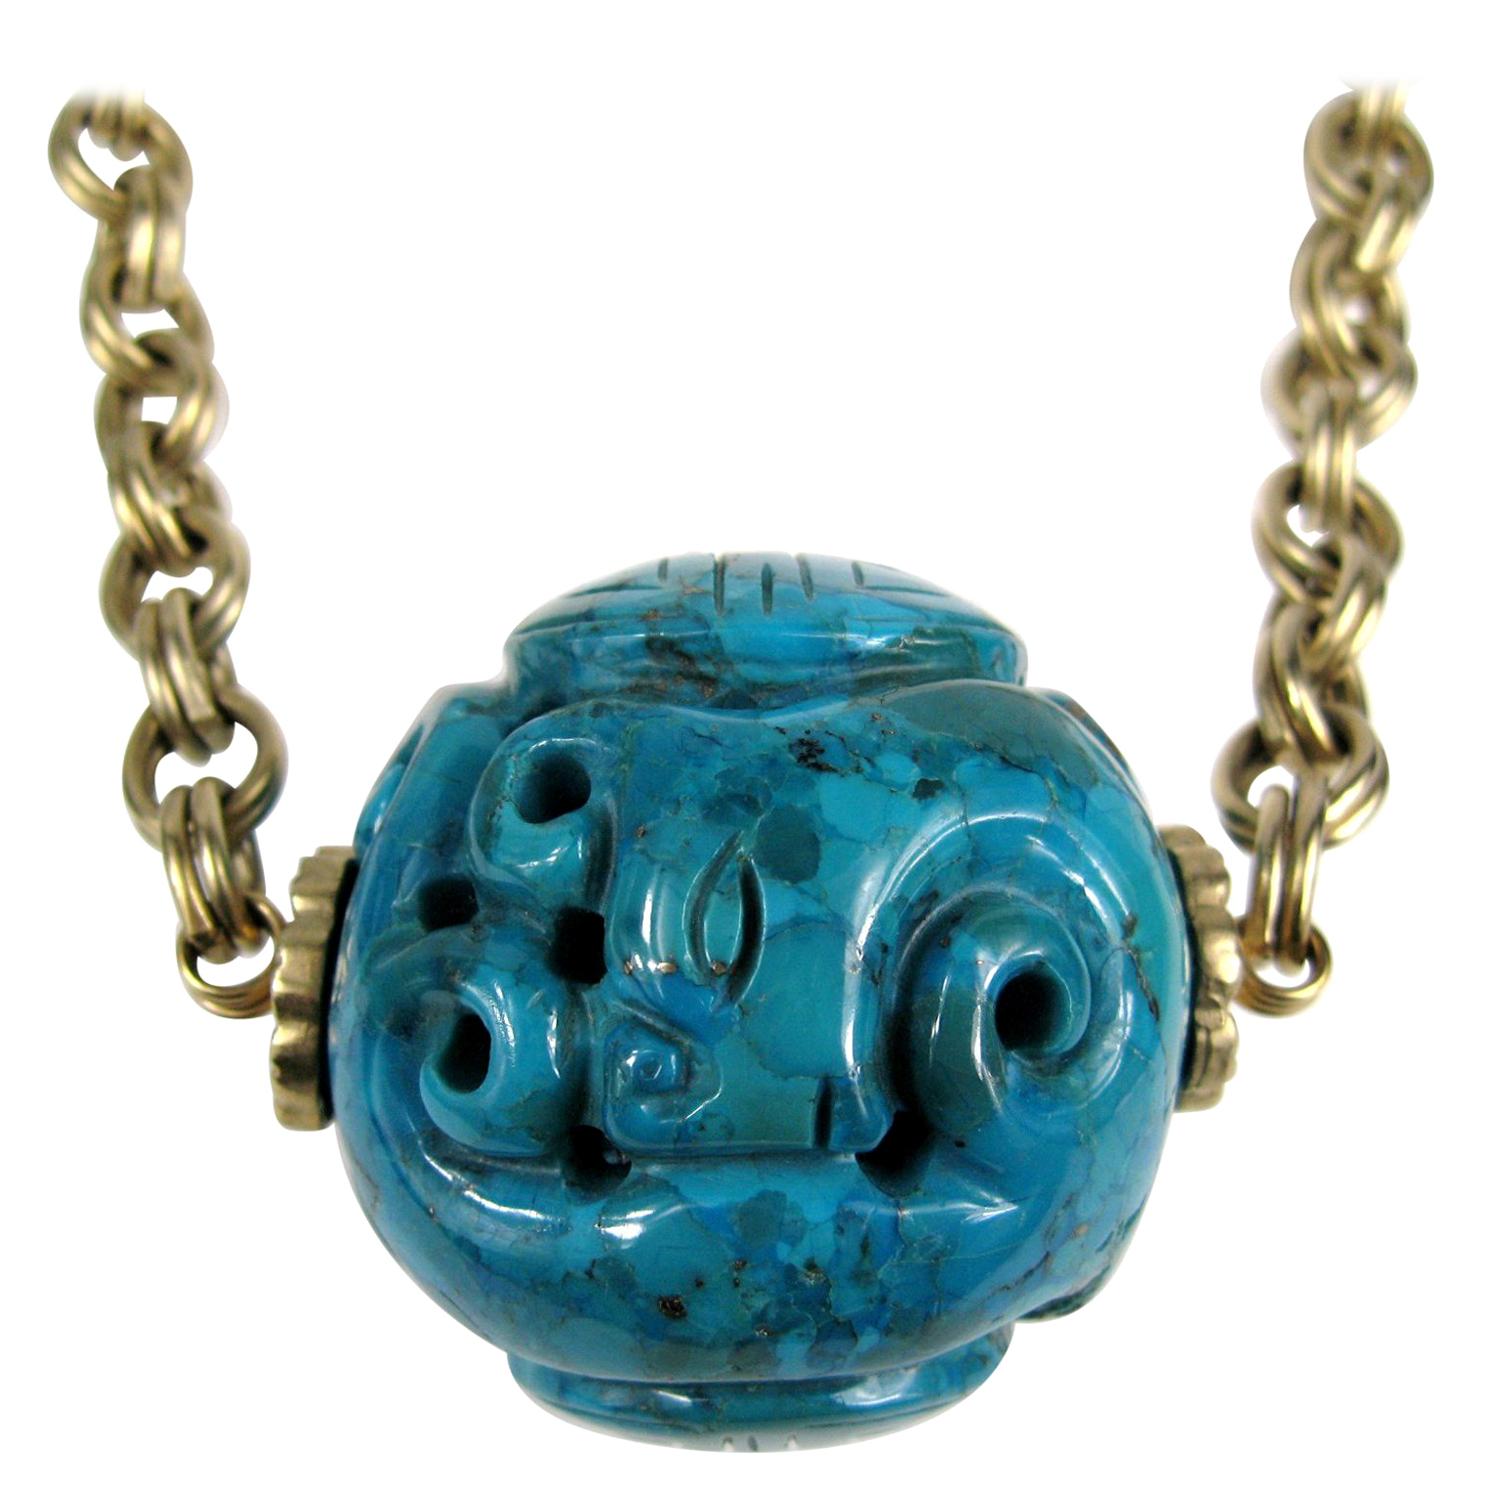  Stephen Dweck Carved 2+" Turquoise Necklace New, Never Worn 1990s